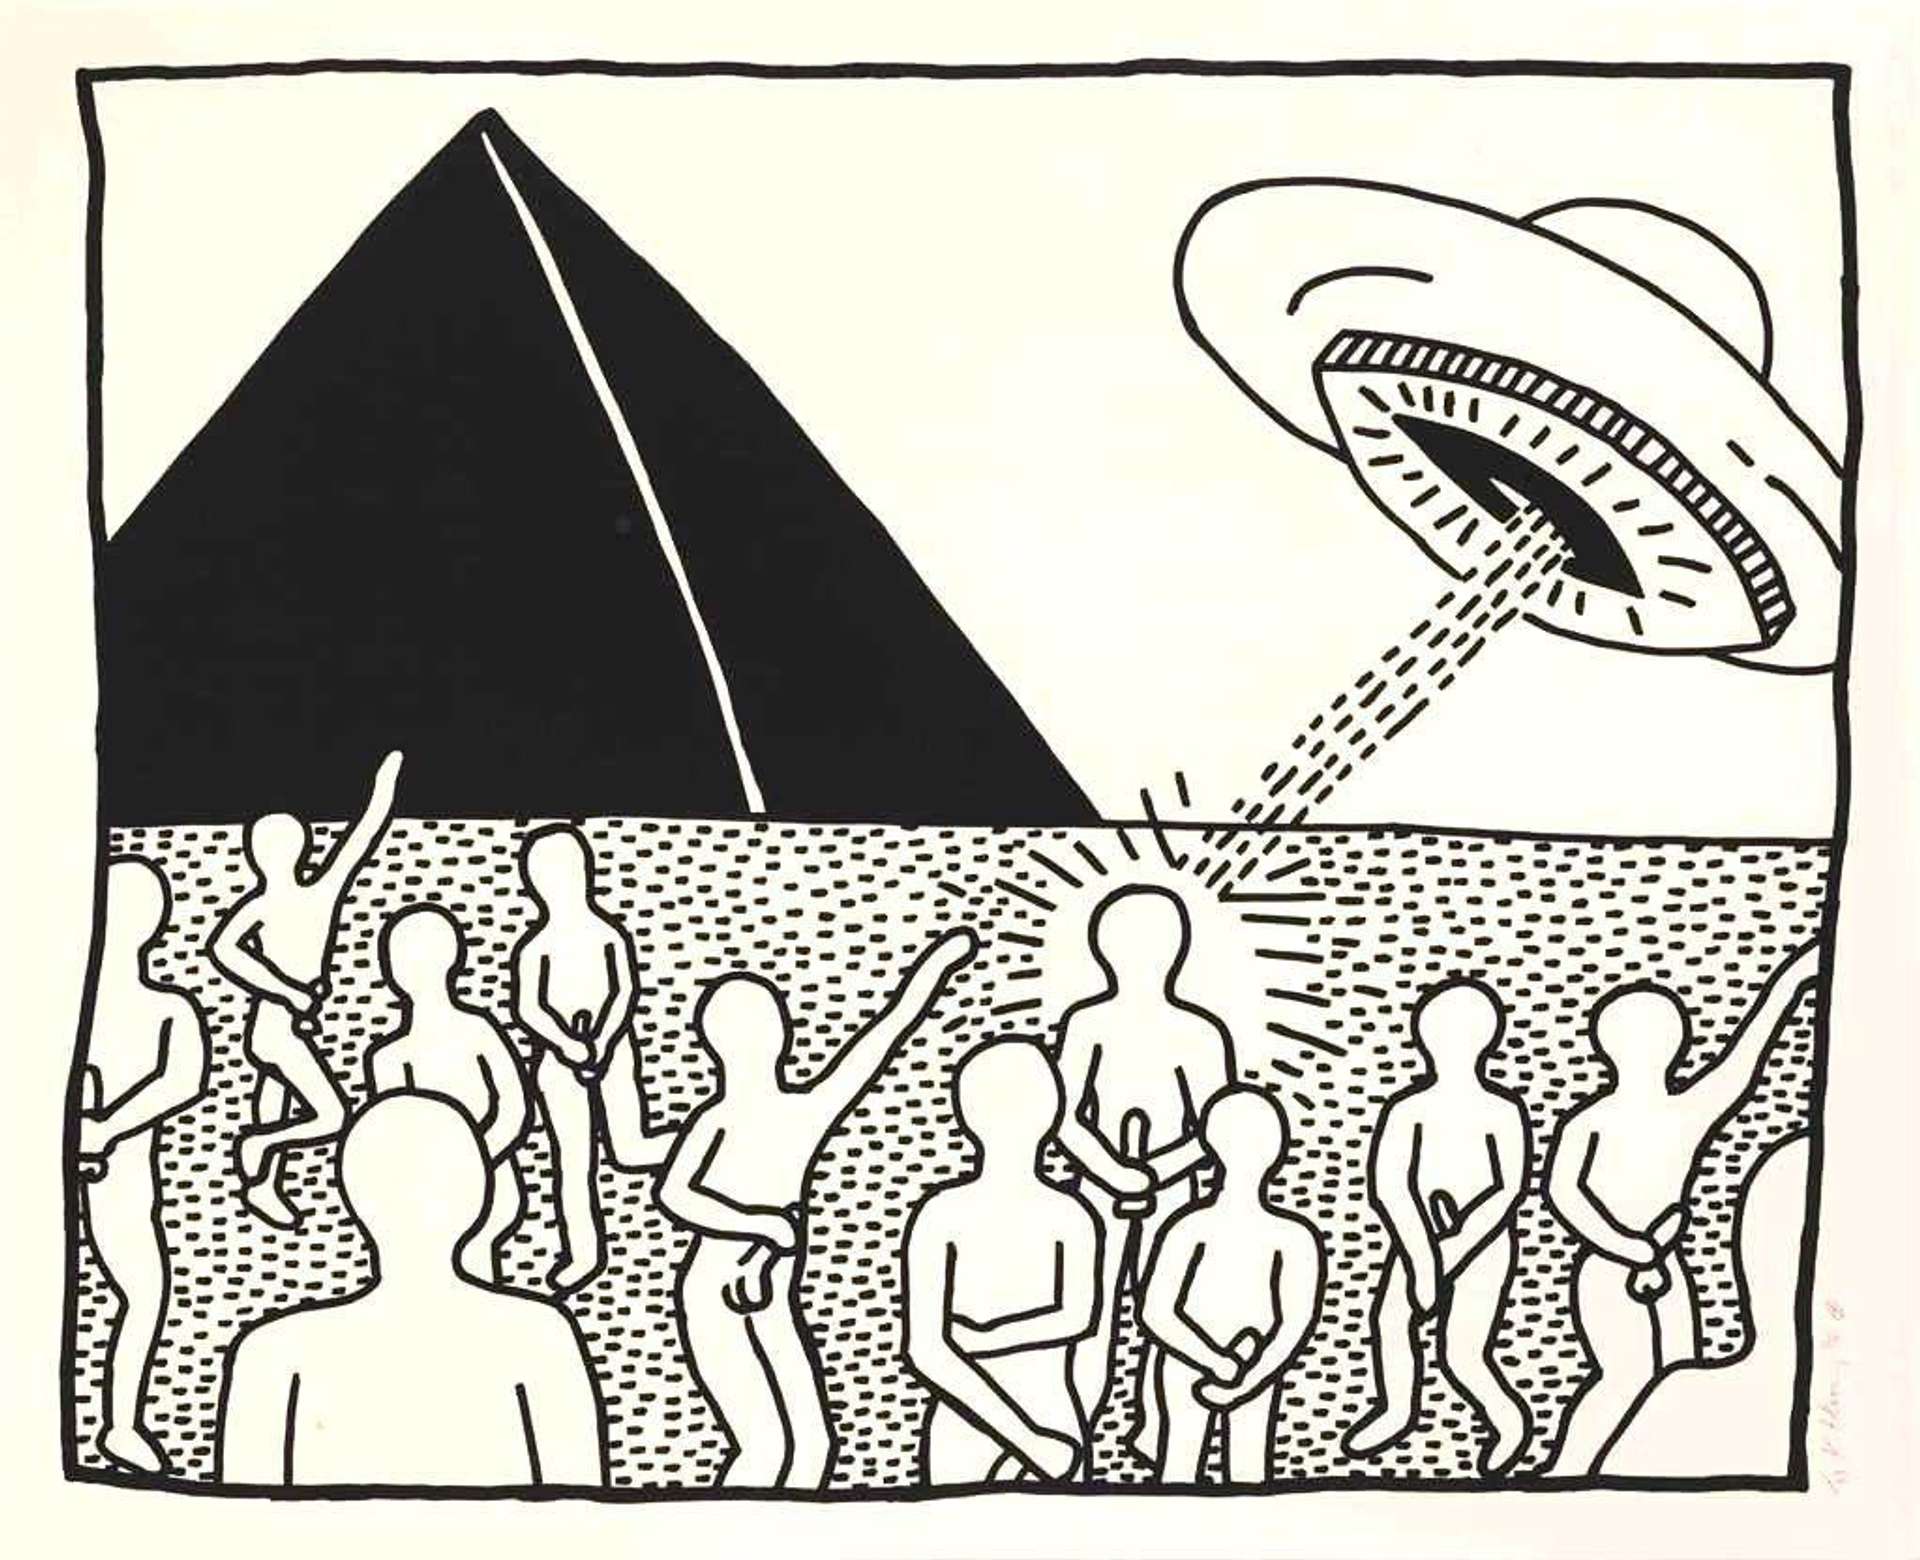 Keith Haring’s The Blueprint Drawings 8. A Pop Art screenprint of a black and white comic strip of a group of figures in front of a pyramid with one being abducted by a UFO.